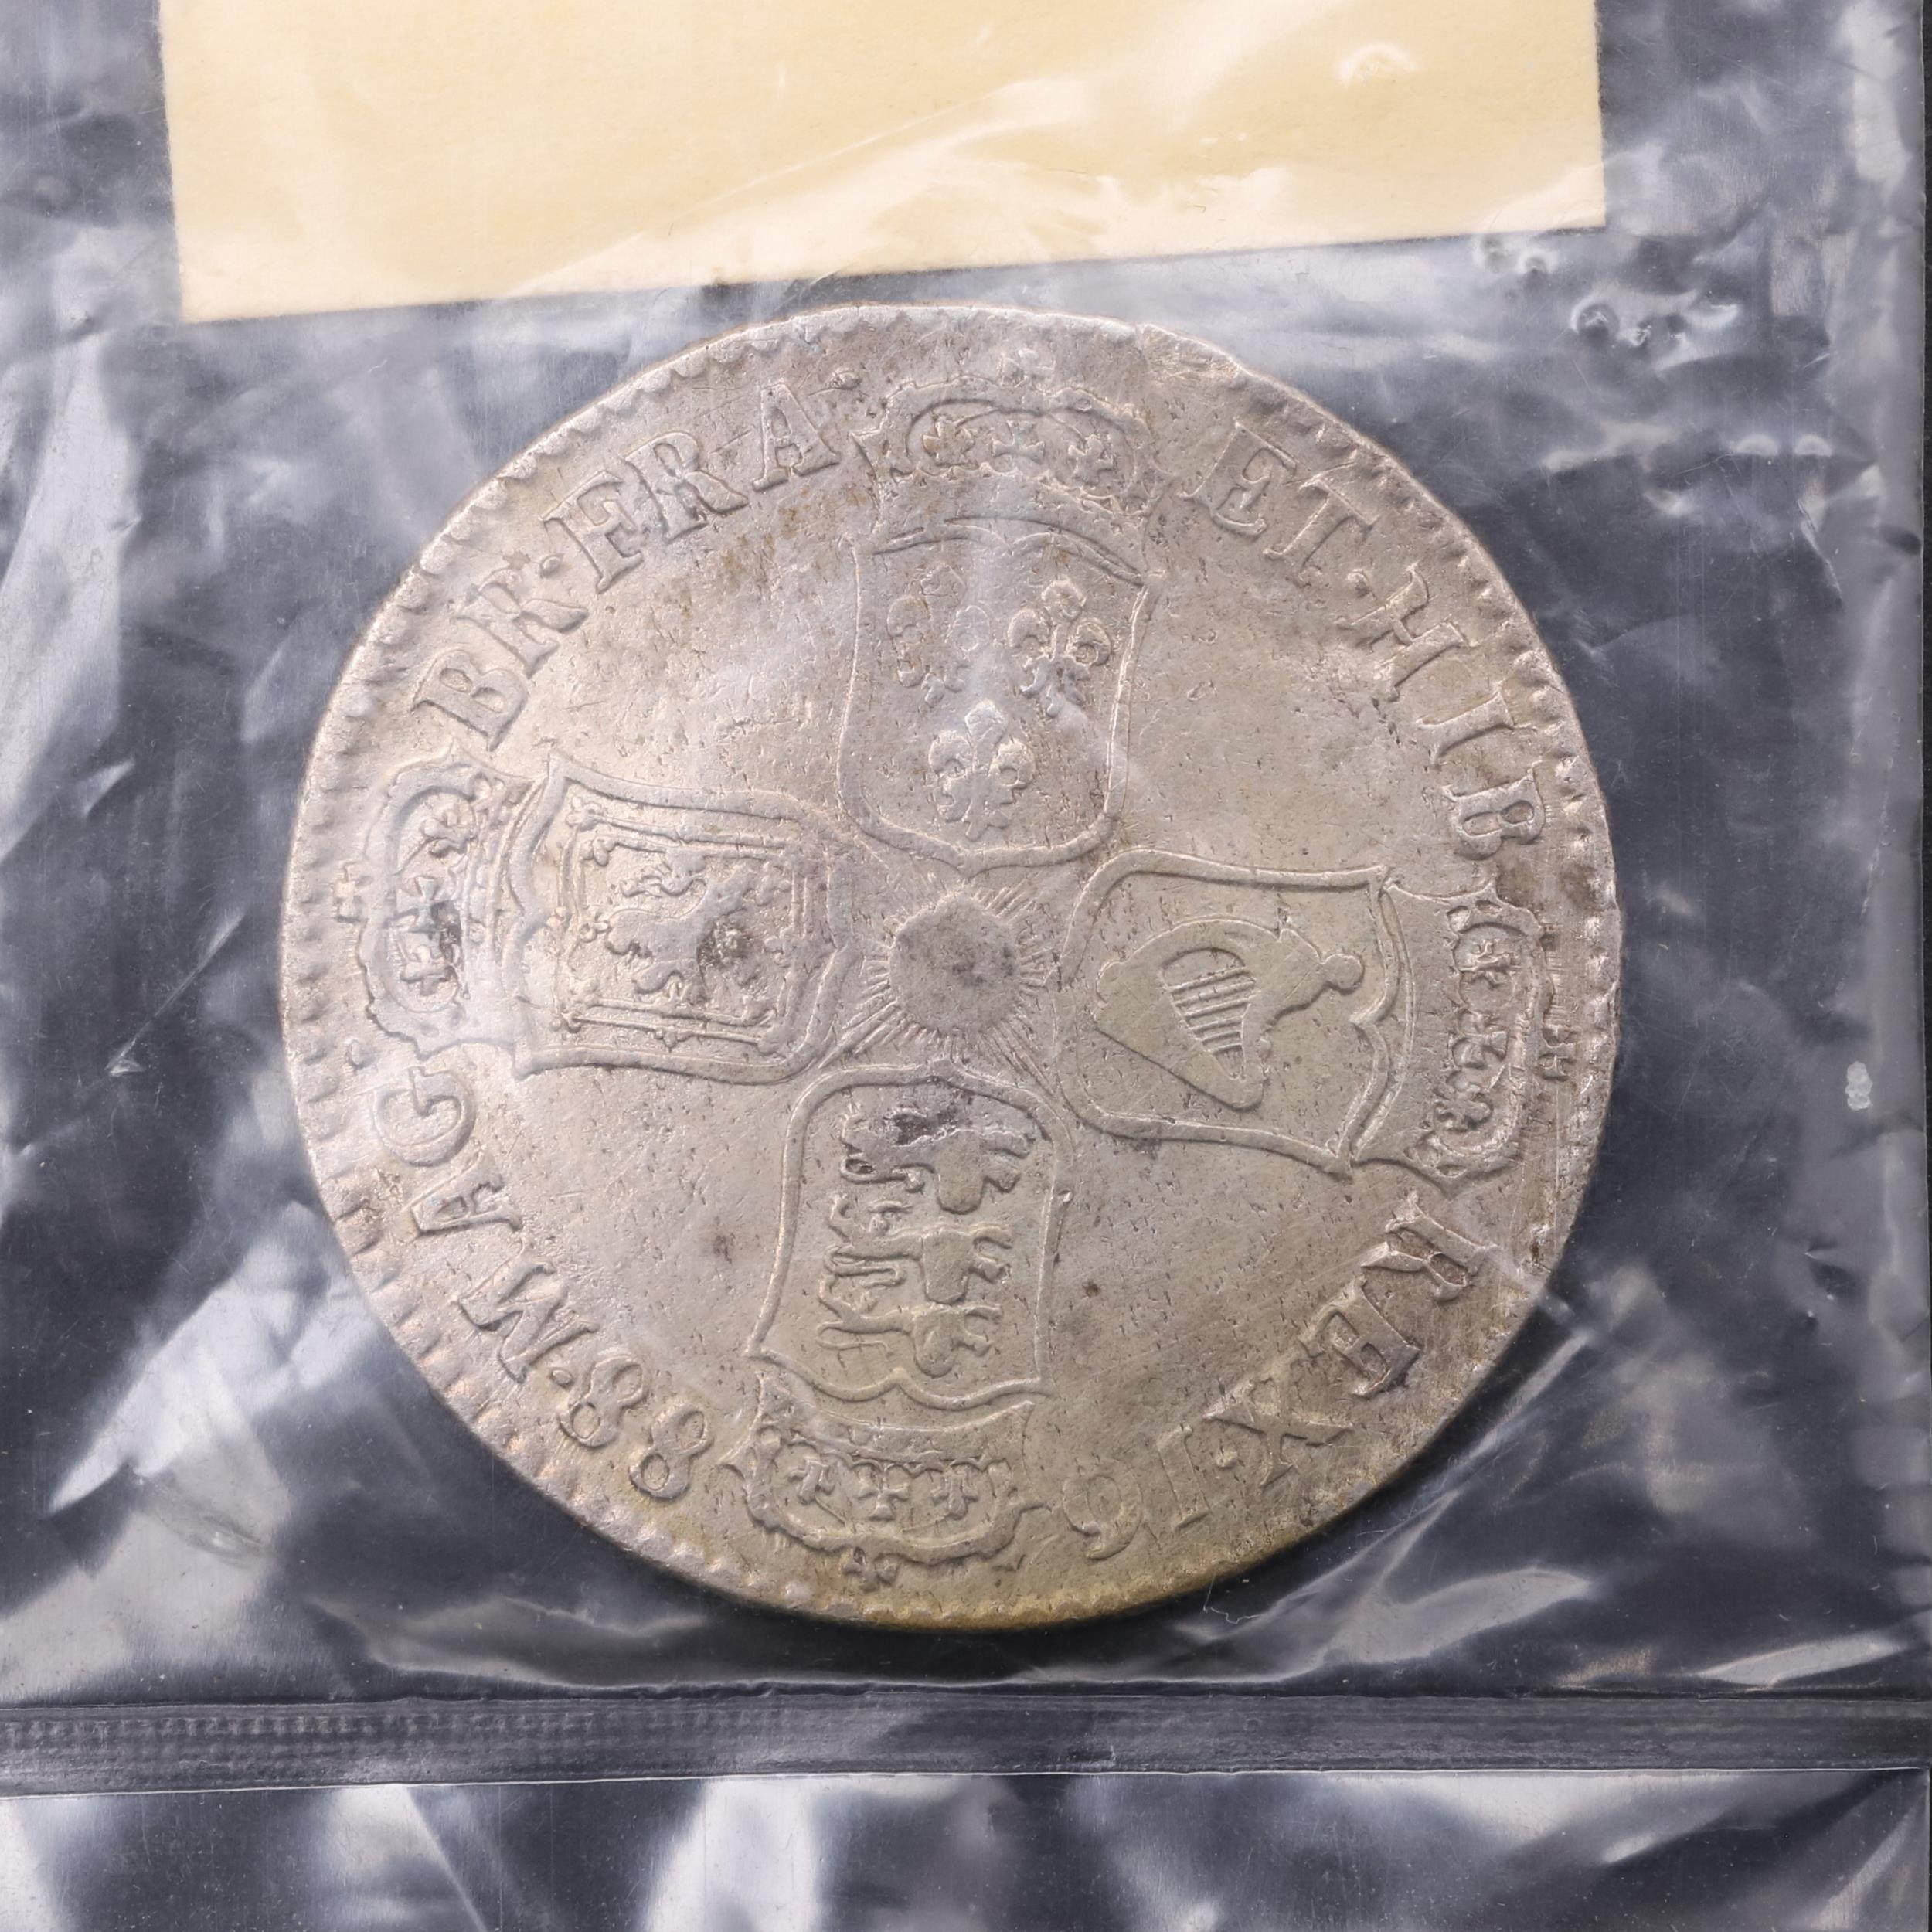 A JAMES II HALFCROWN, 1688, FROM THE WRECK OF THE ASSOCIATION. - Image 2 of 3